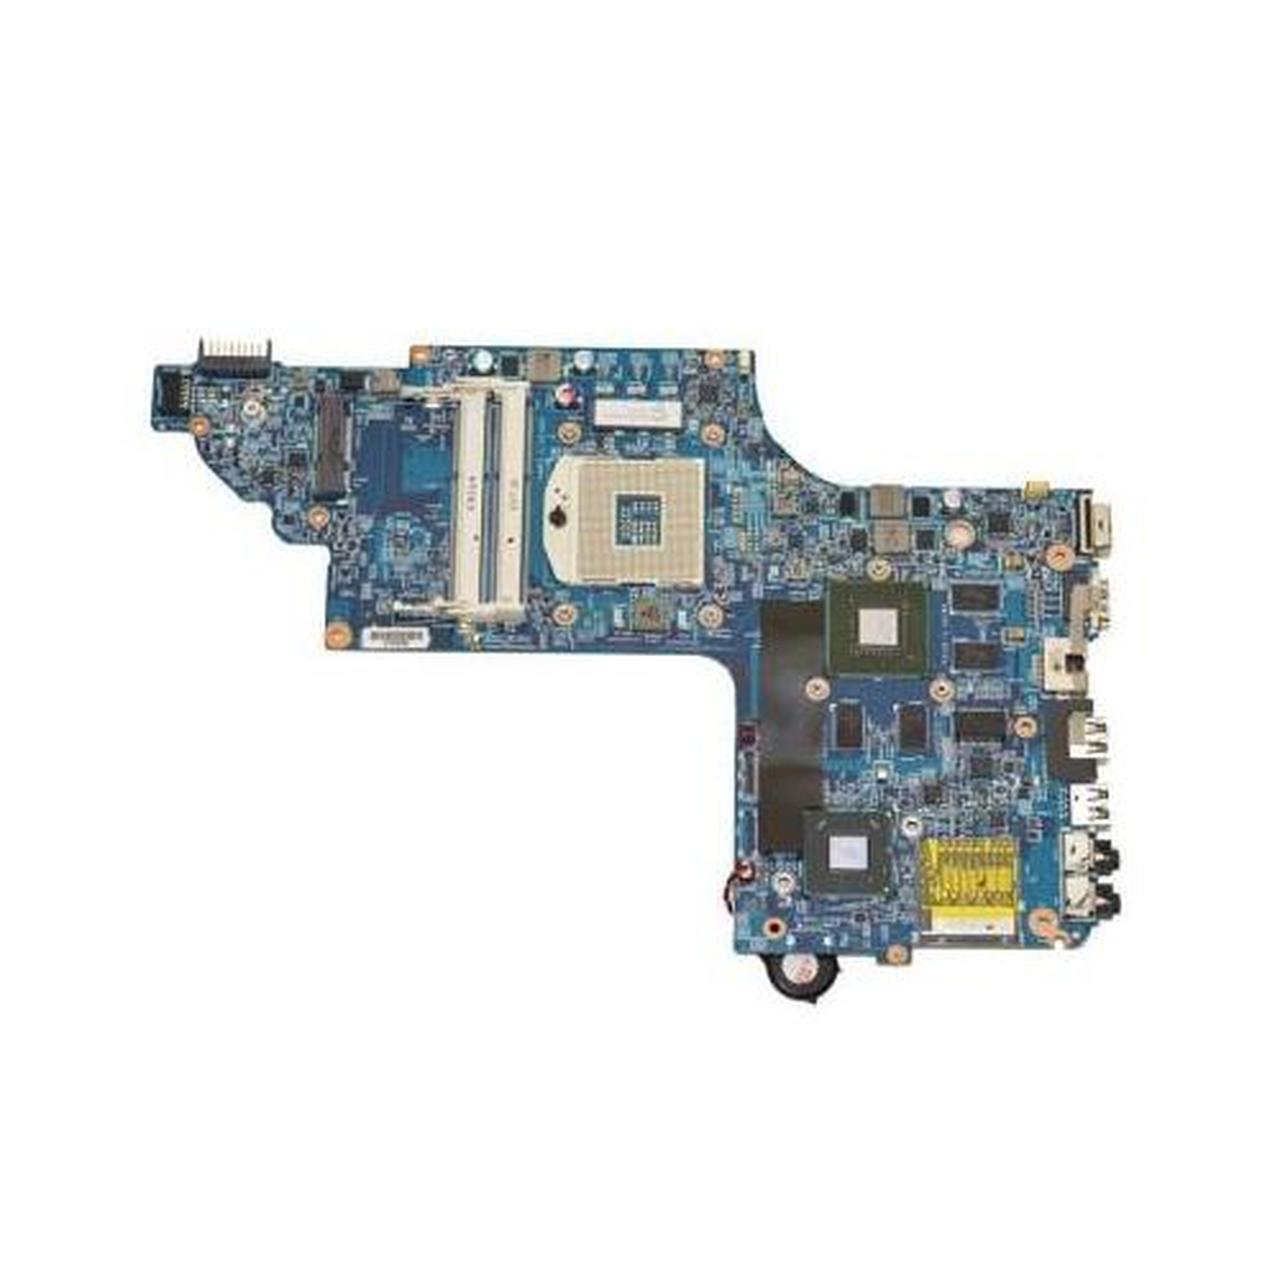 682040-001 HP System Board (MotherBoard) Intel HM77 650M/2G for Pavilion DV7-7000 Notebook PC (Refurbished) - Click Image to Close